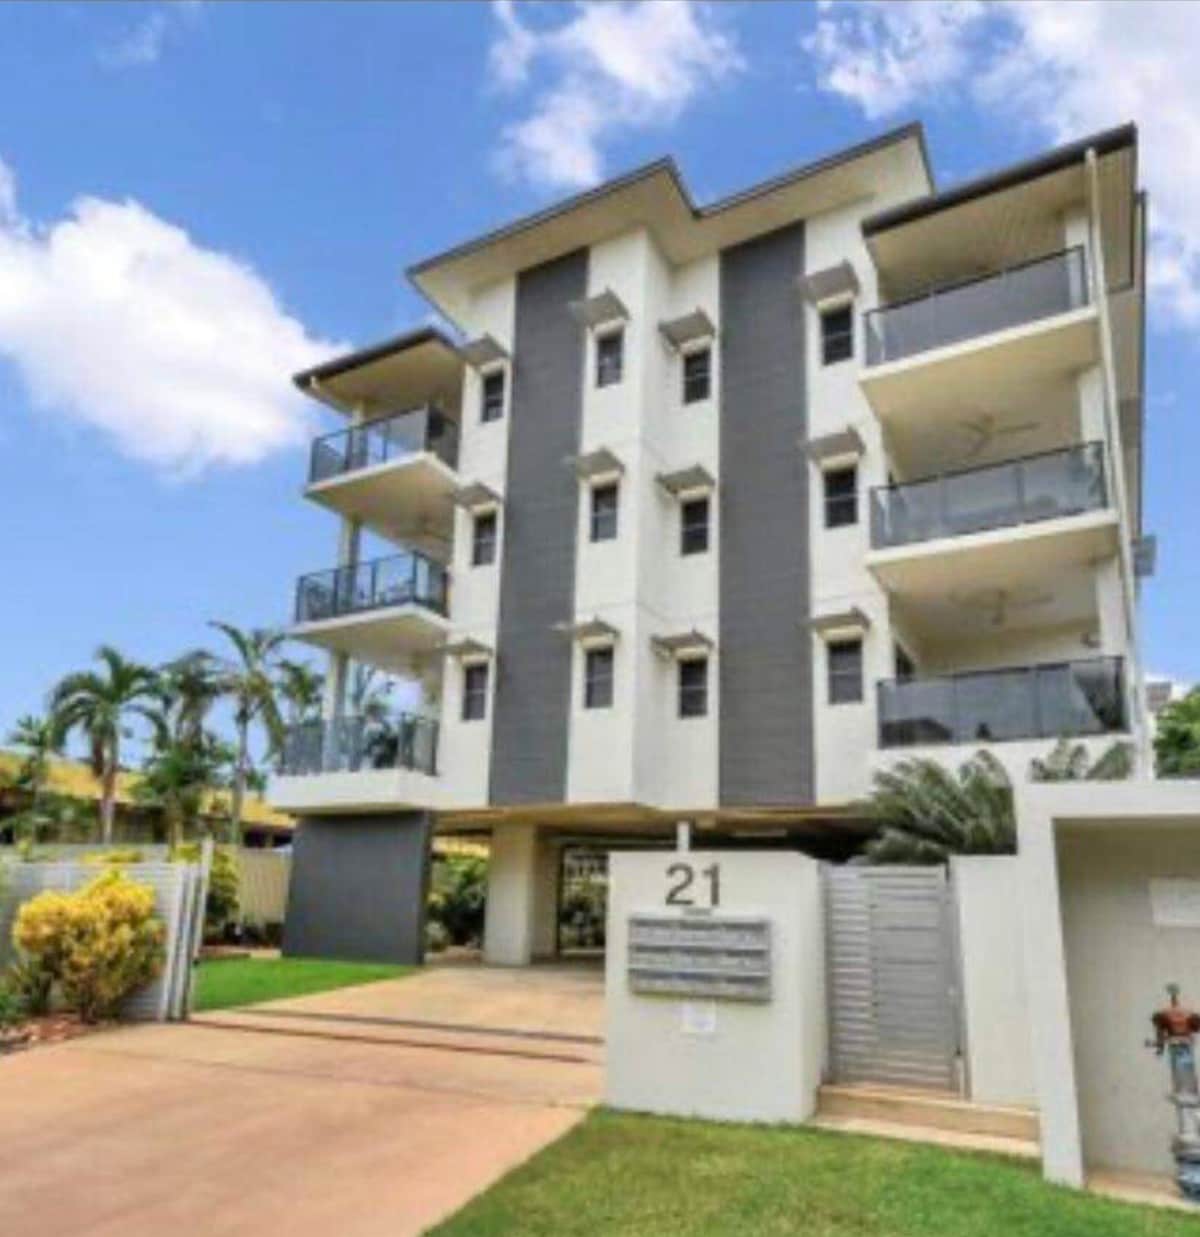 Well located apartment Nightcliff Foreshore area